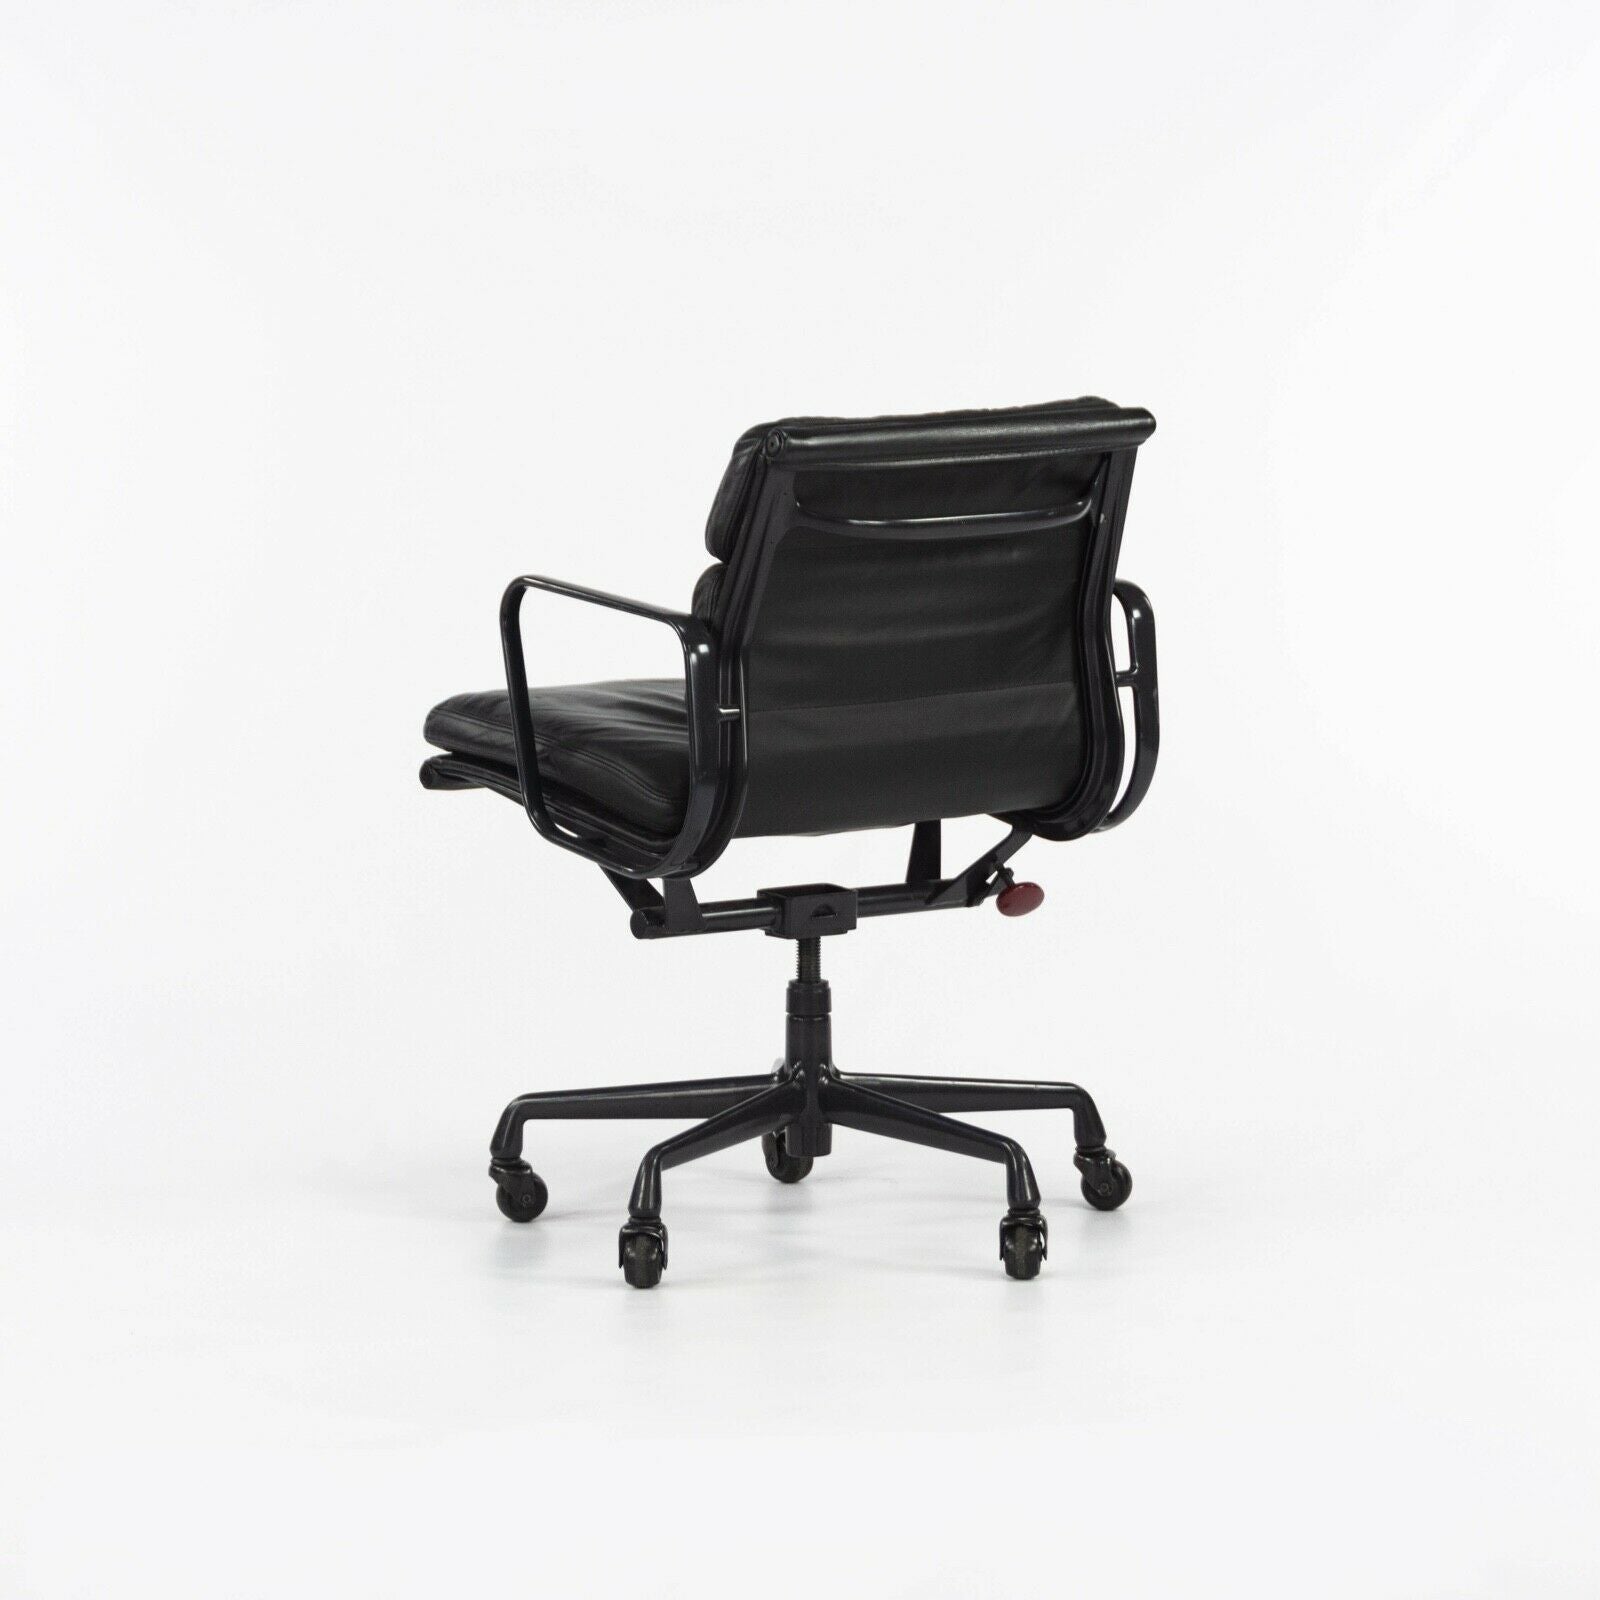 SOLD 1990s Herman Miller Eames Aluminum Group Soft Pad Management Chair Black Leather